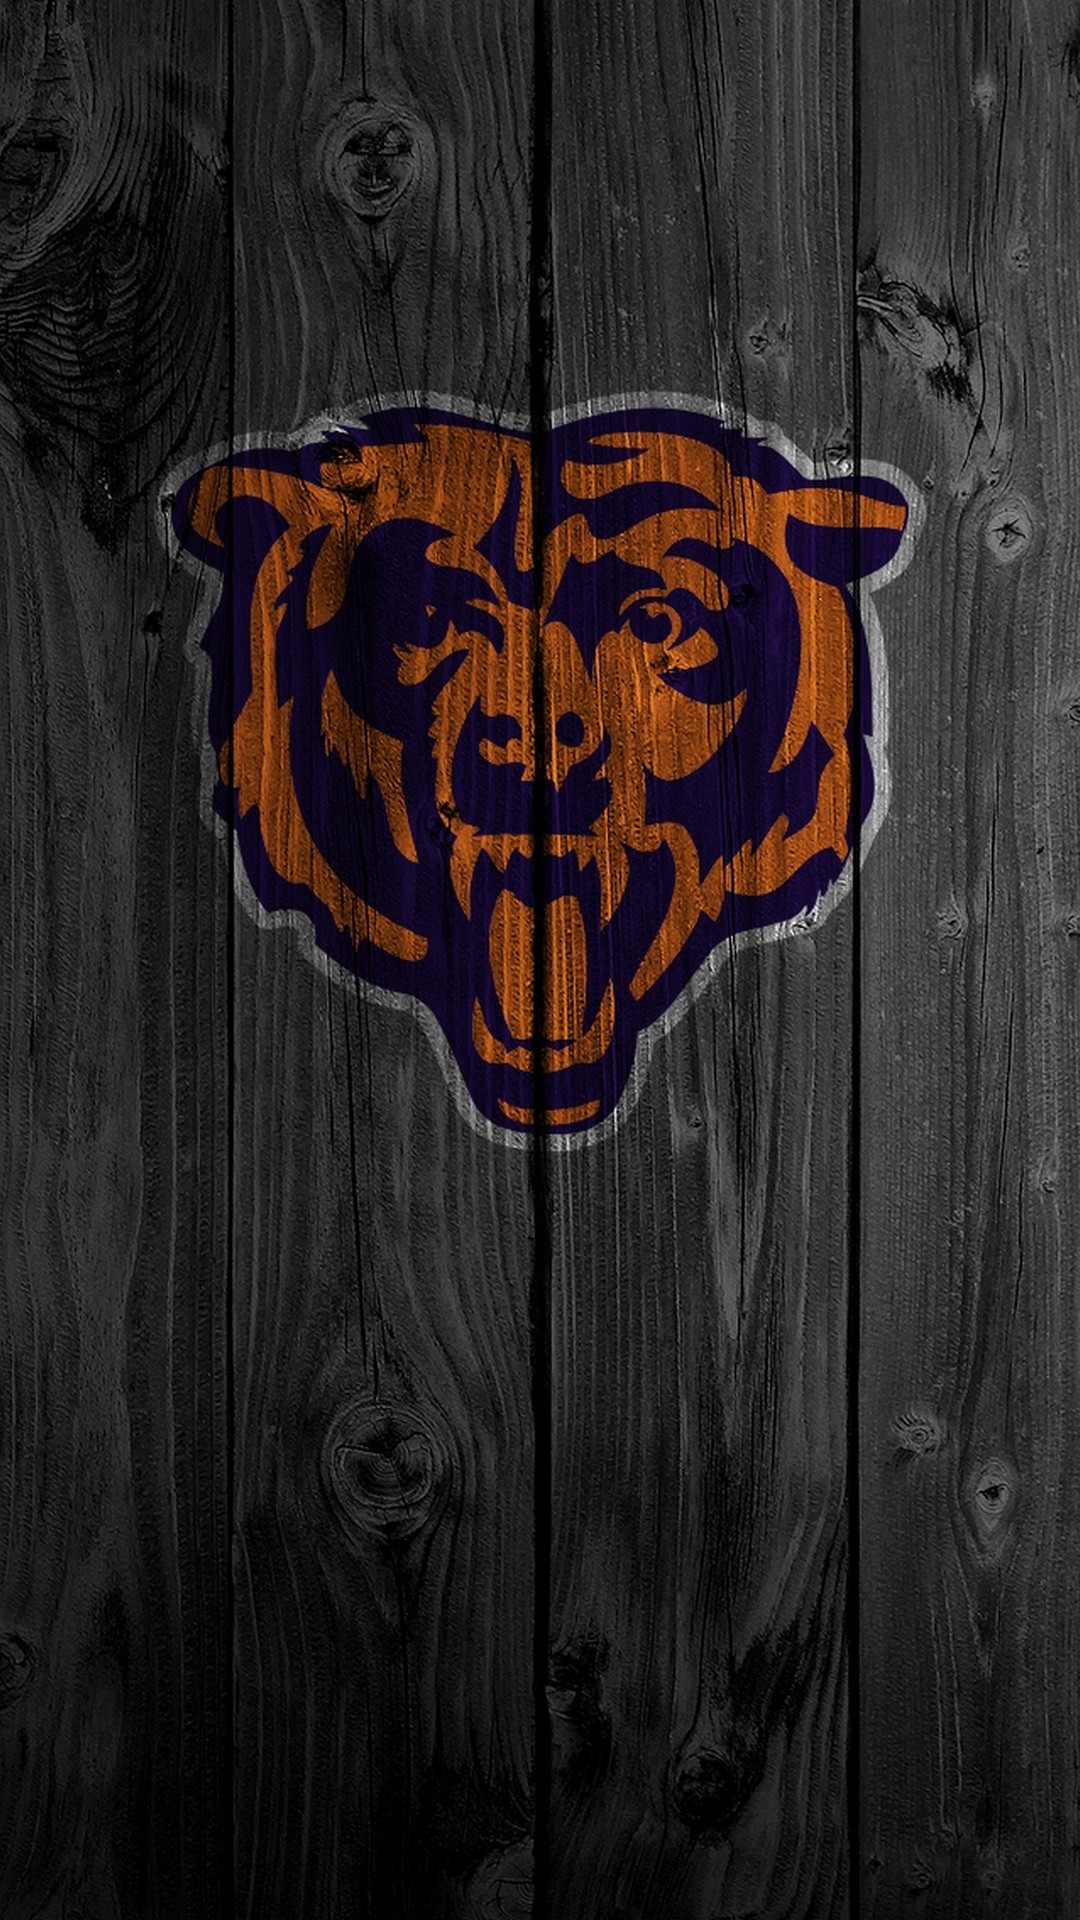 Chicago Bears iPhone Wallpaper Tumblr with high-resolution 1080x1920 pixel. Download and set as wallpaper for Apple iPhone X, XS Max, XR, 8, 7, 6, SE, iPad, Android